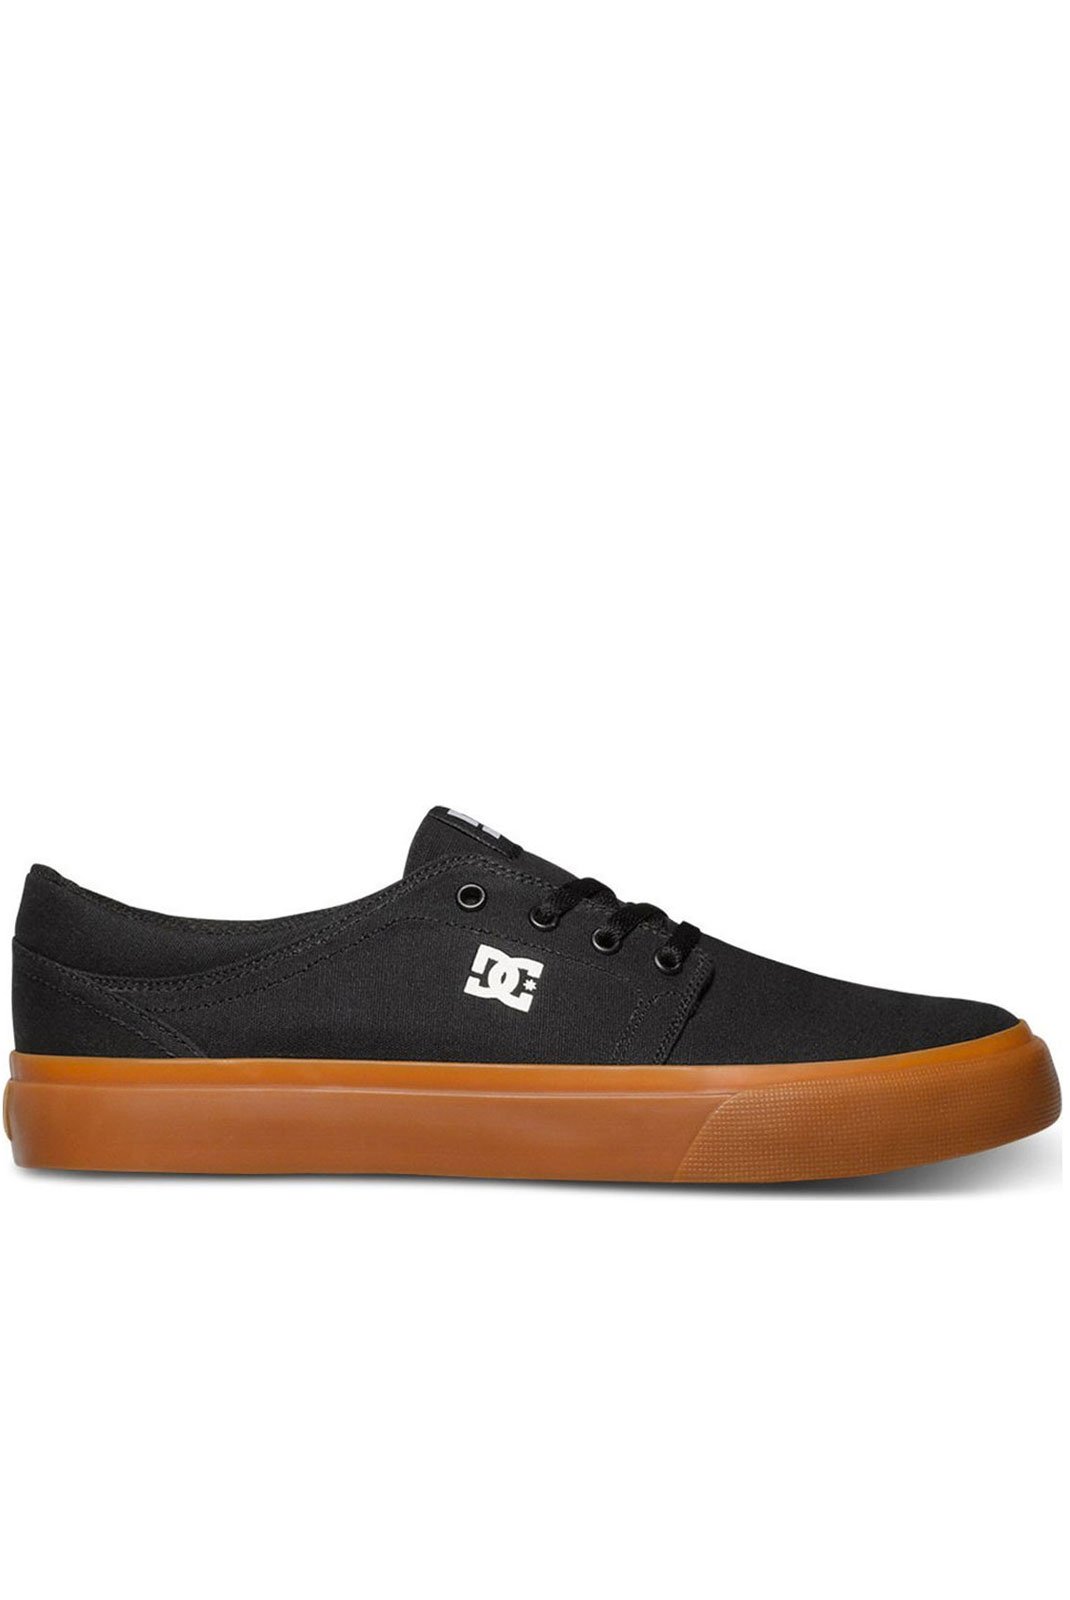 Sneakers / Sport  Dc shoes ADYS300126 BGM